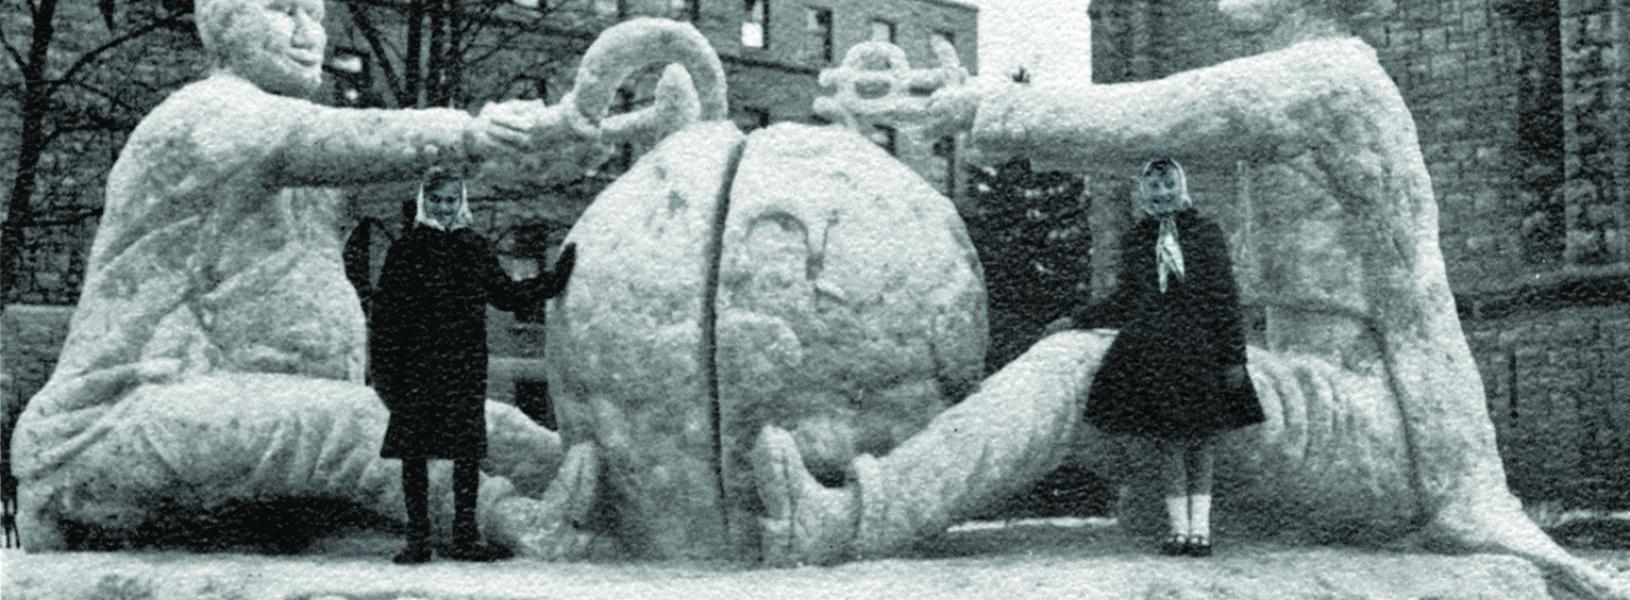 A 1961 photo of a campus snow sculpture entitled "Cold War" featuring Uncle Sam and Khrushchev fighting over a globe.